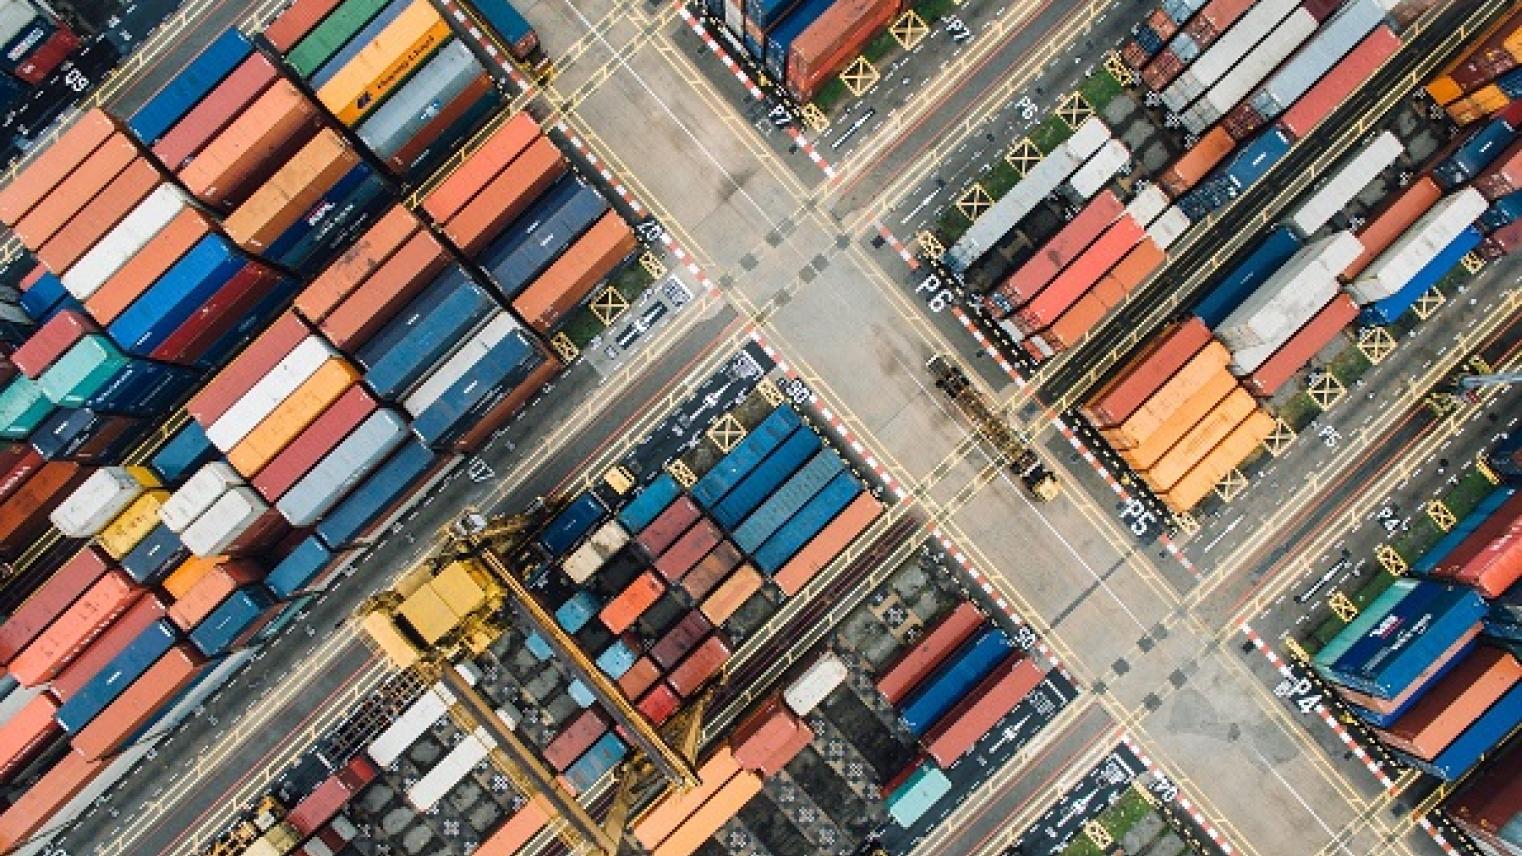 Aerial view of orderly shipping containers https://www.maxpixel.net/photo-2568204 (CC0) https://creativecommons.org/publicdomain/zero/1.0/